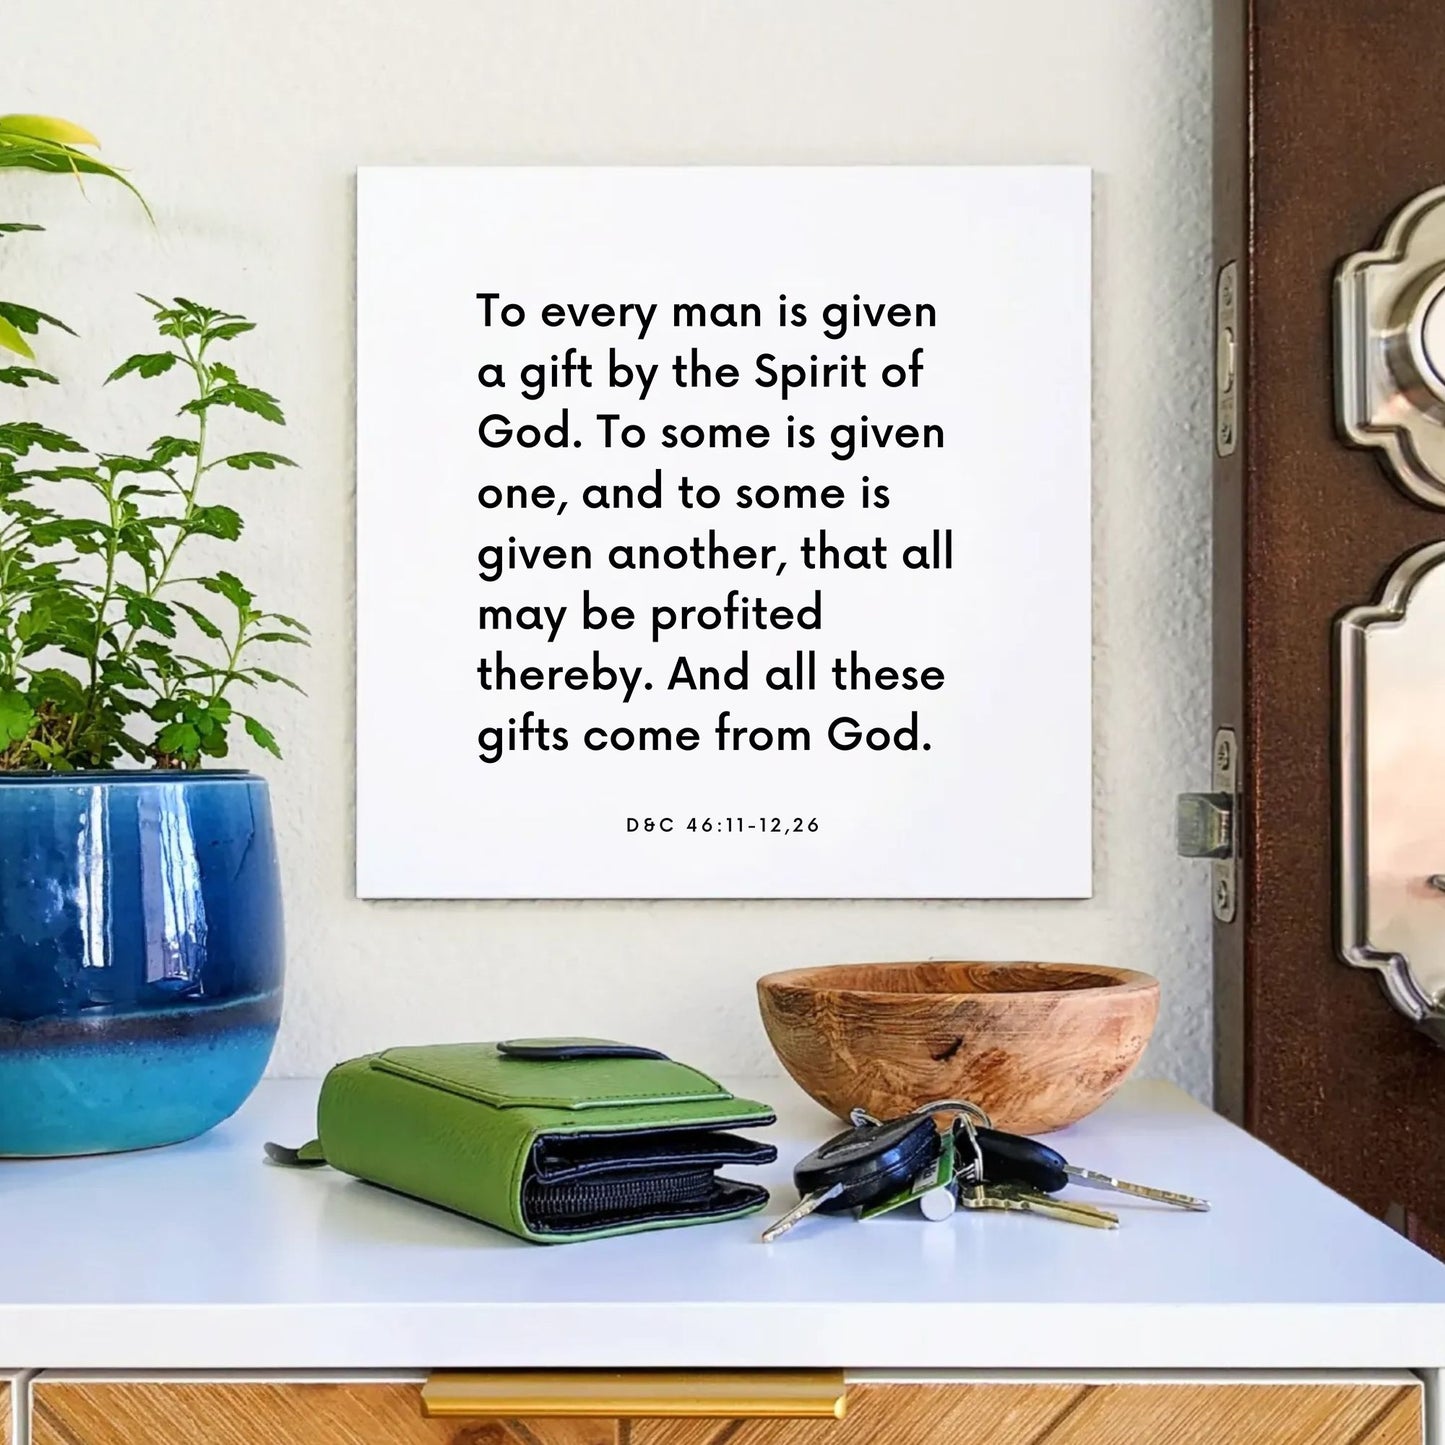 Entryway mouting of the scripture tile for D&C 46:11-12,26 - "To every man is given a gift by the Spirit of God"